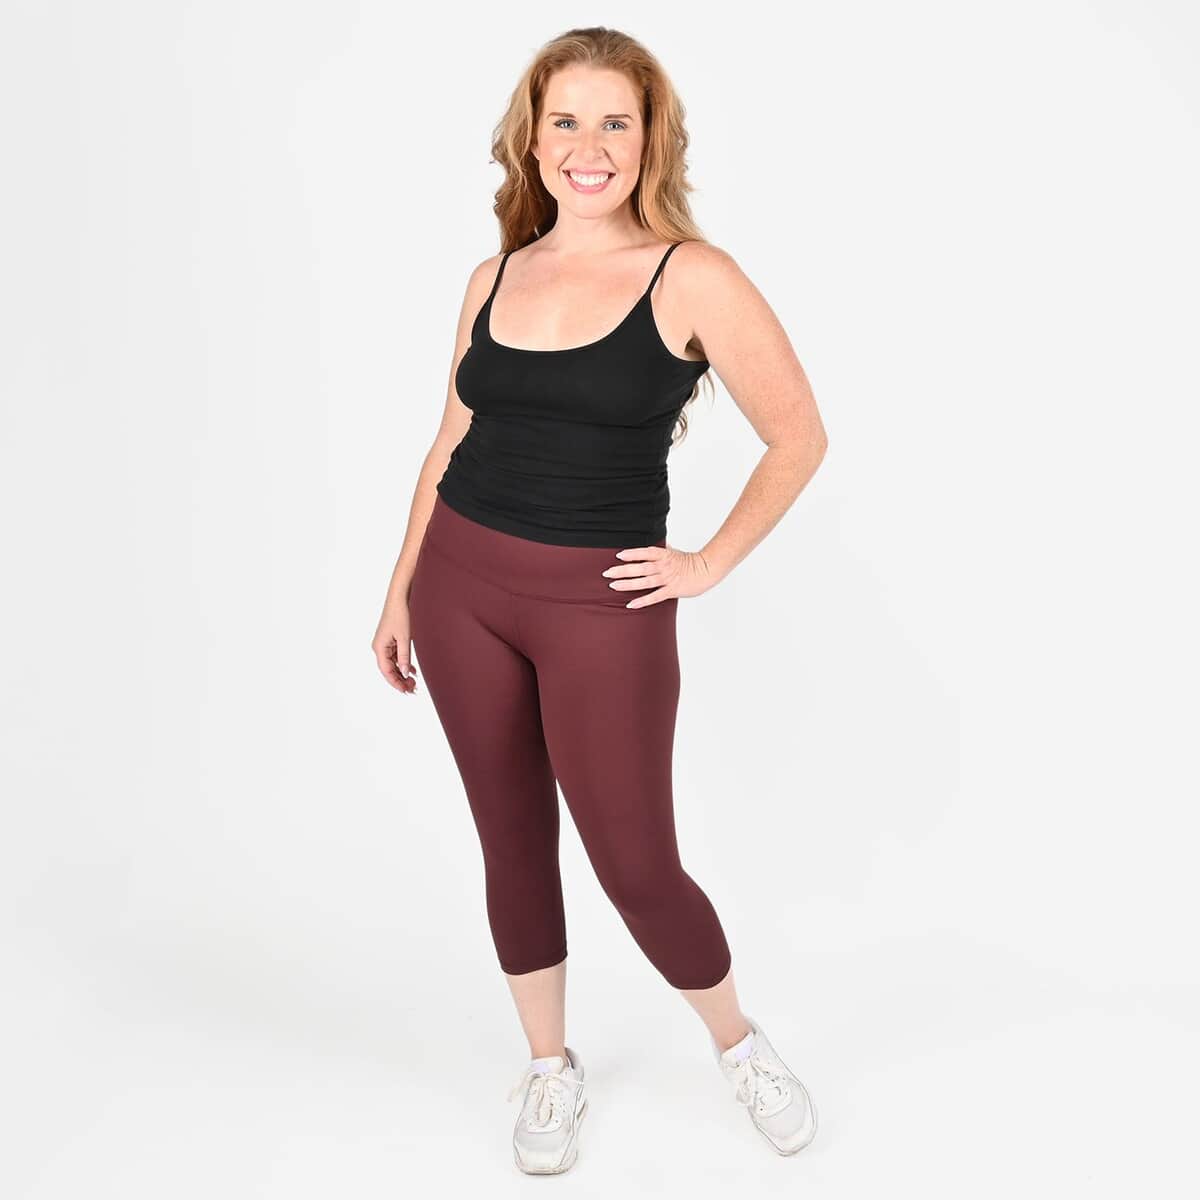 Tamsy Chocolate High Waisted Capri Leggings -S image number 0